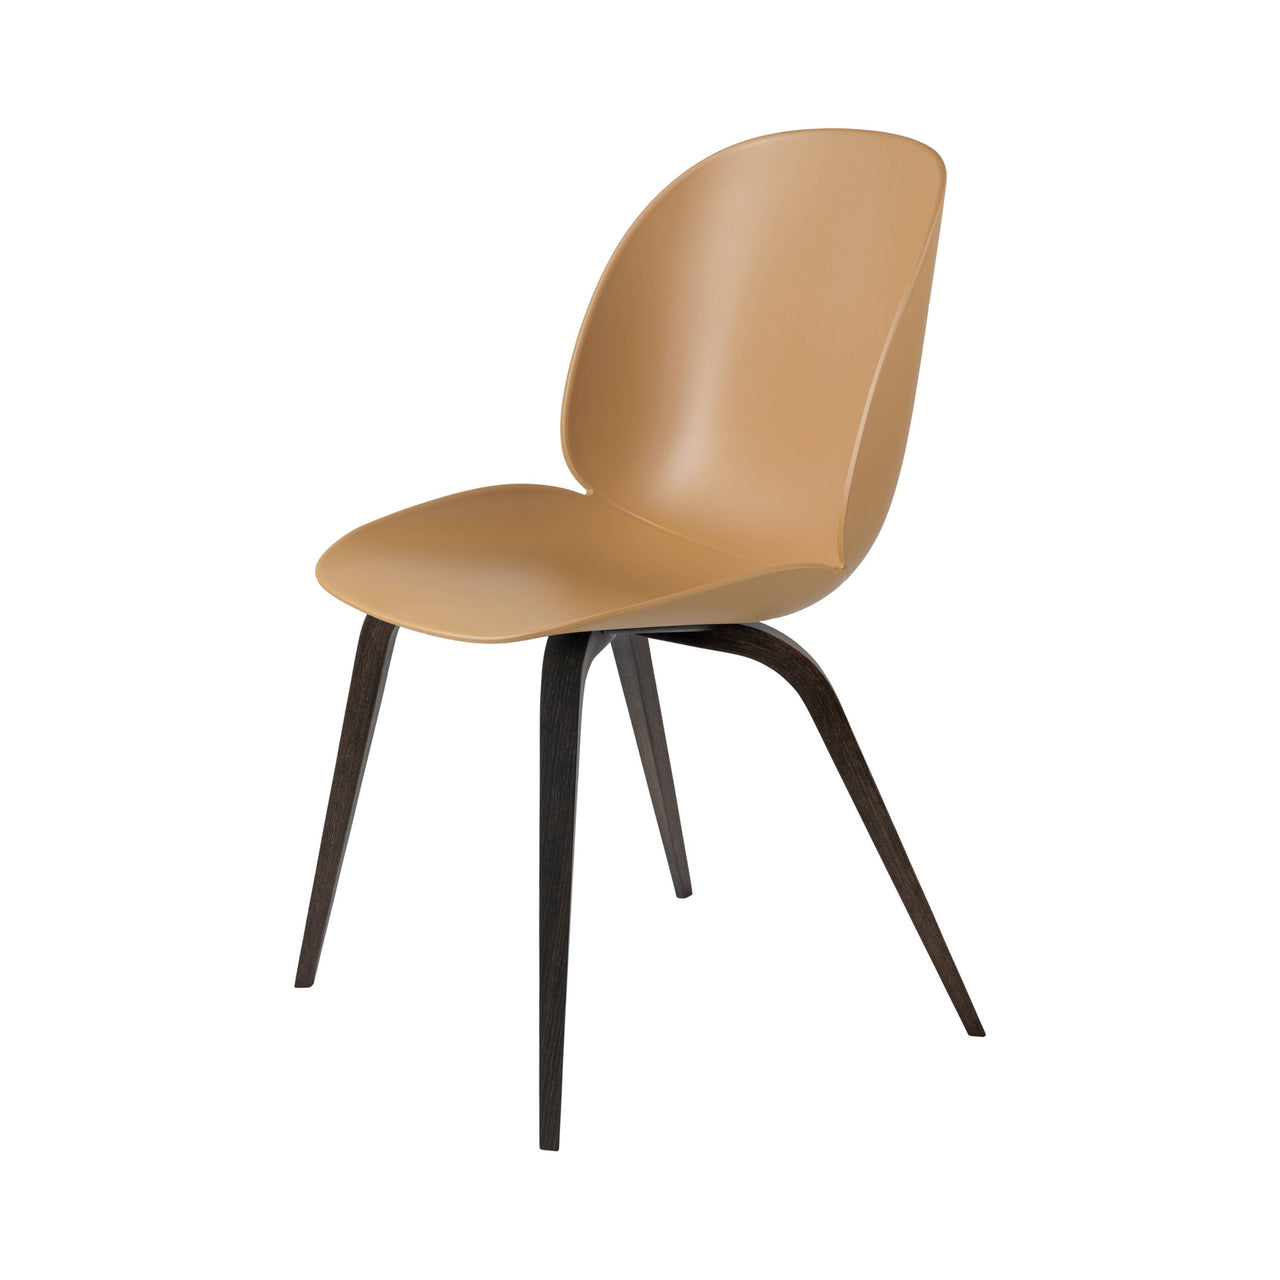 Beetle Dining Chair: Wood Base + Amber Brown + Smoked Oak + Plastic Glides